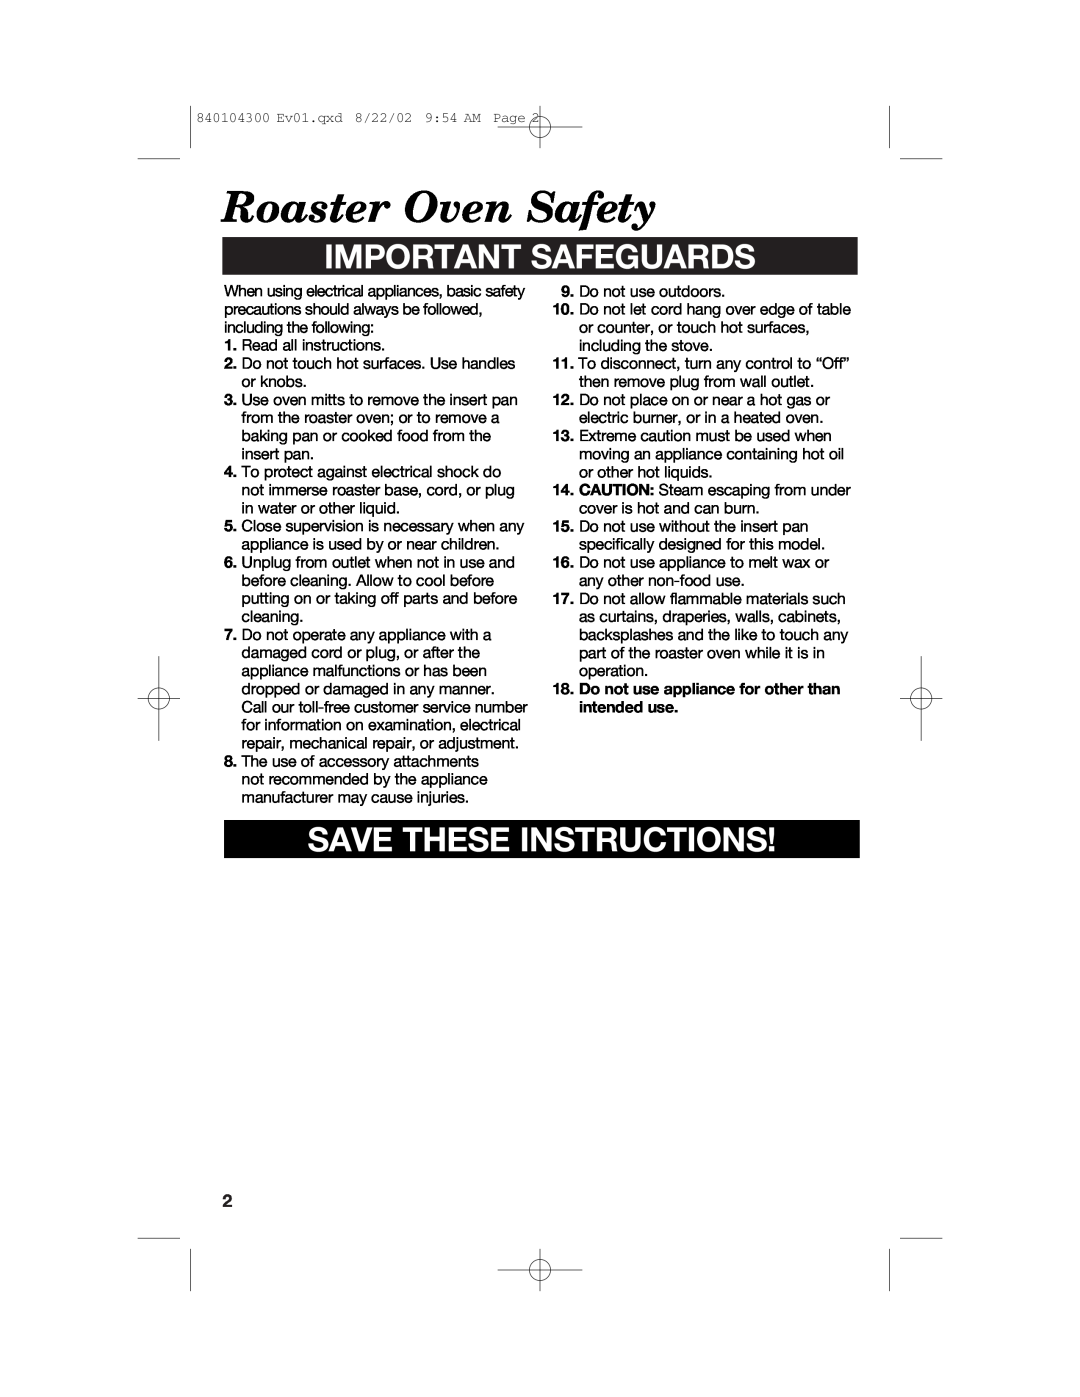 Hamilton Beach 32180C manual Roaster Oven Safety, Important Safeguards, Save These Instructions 